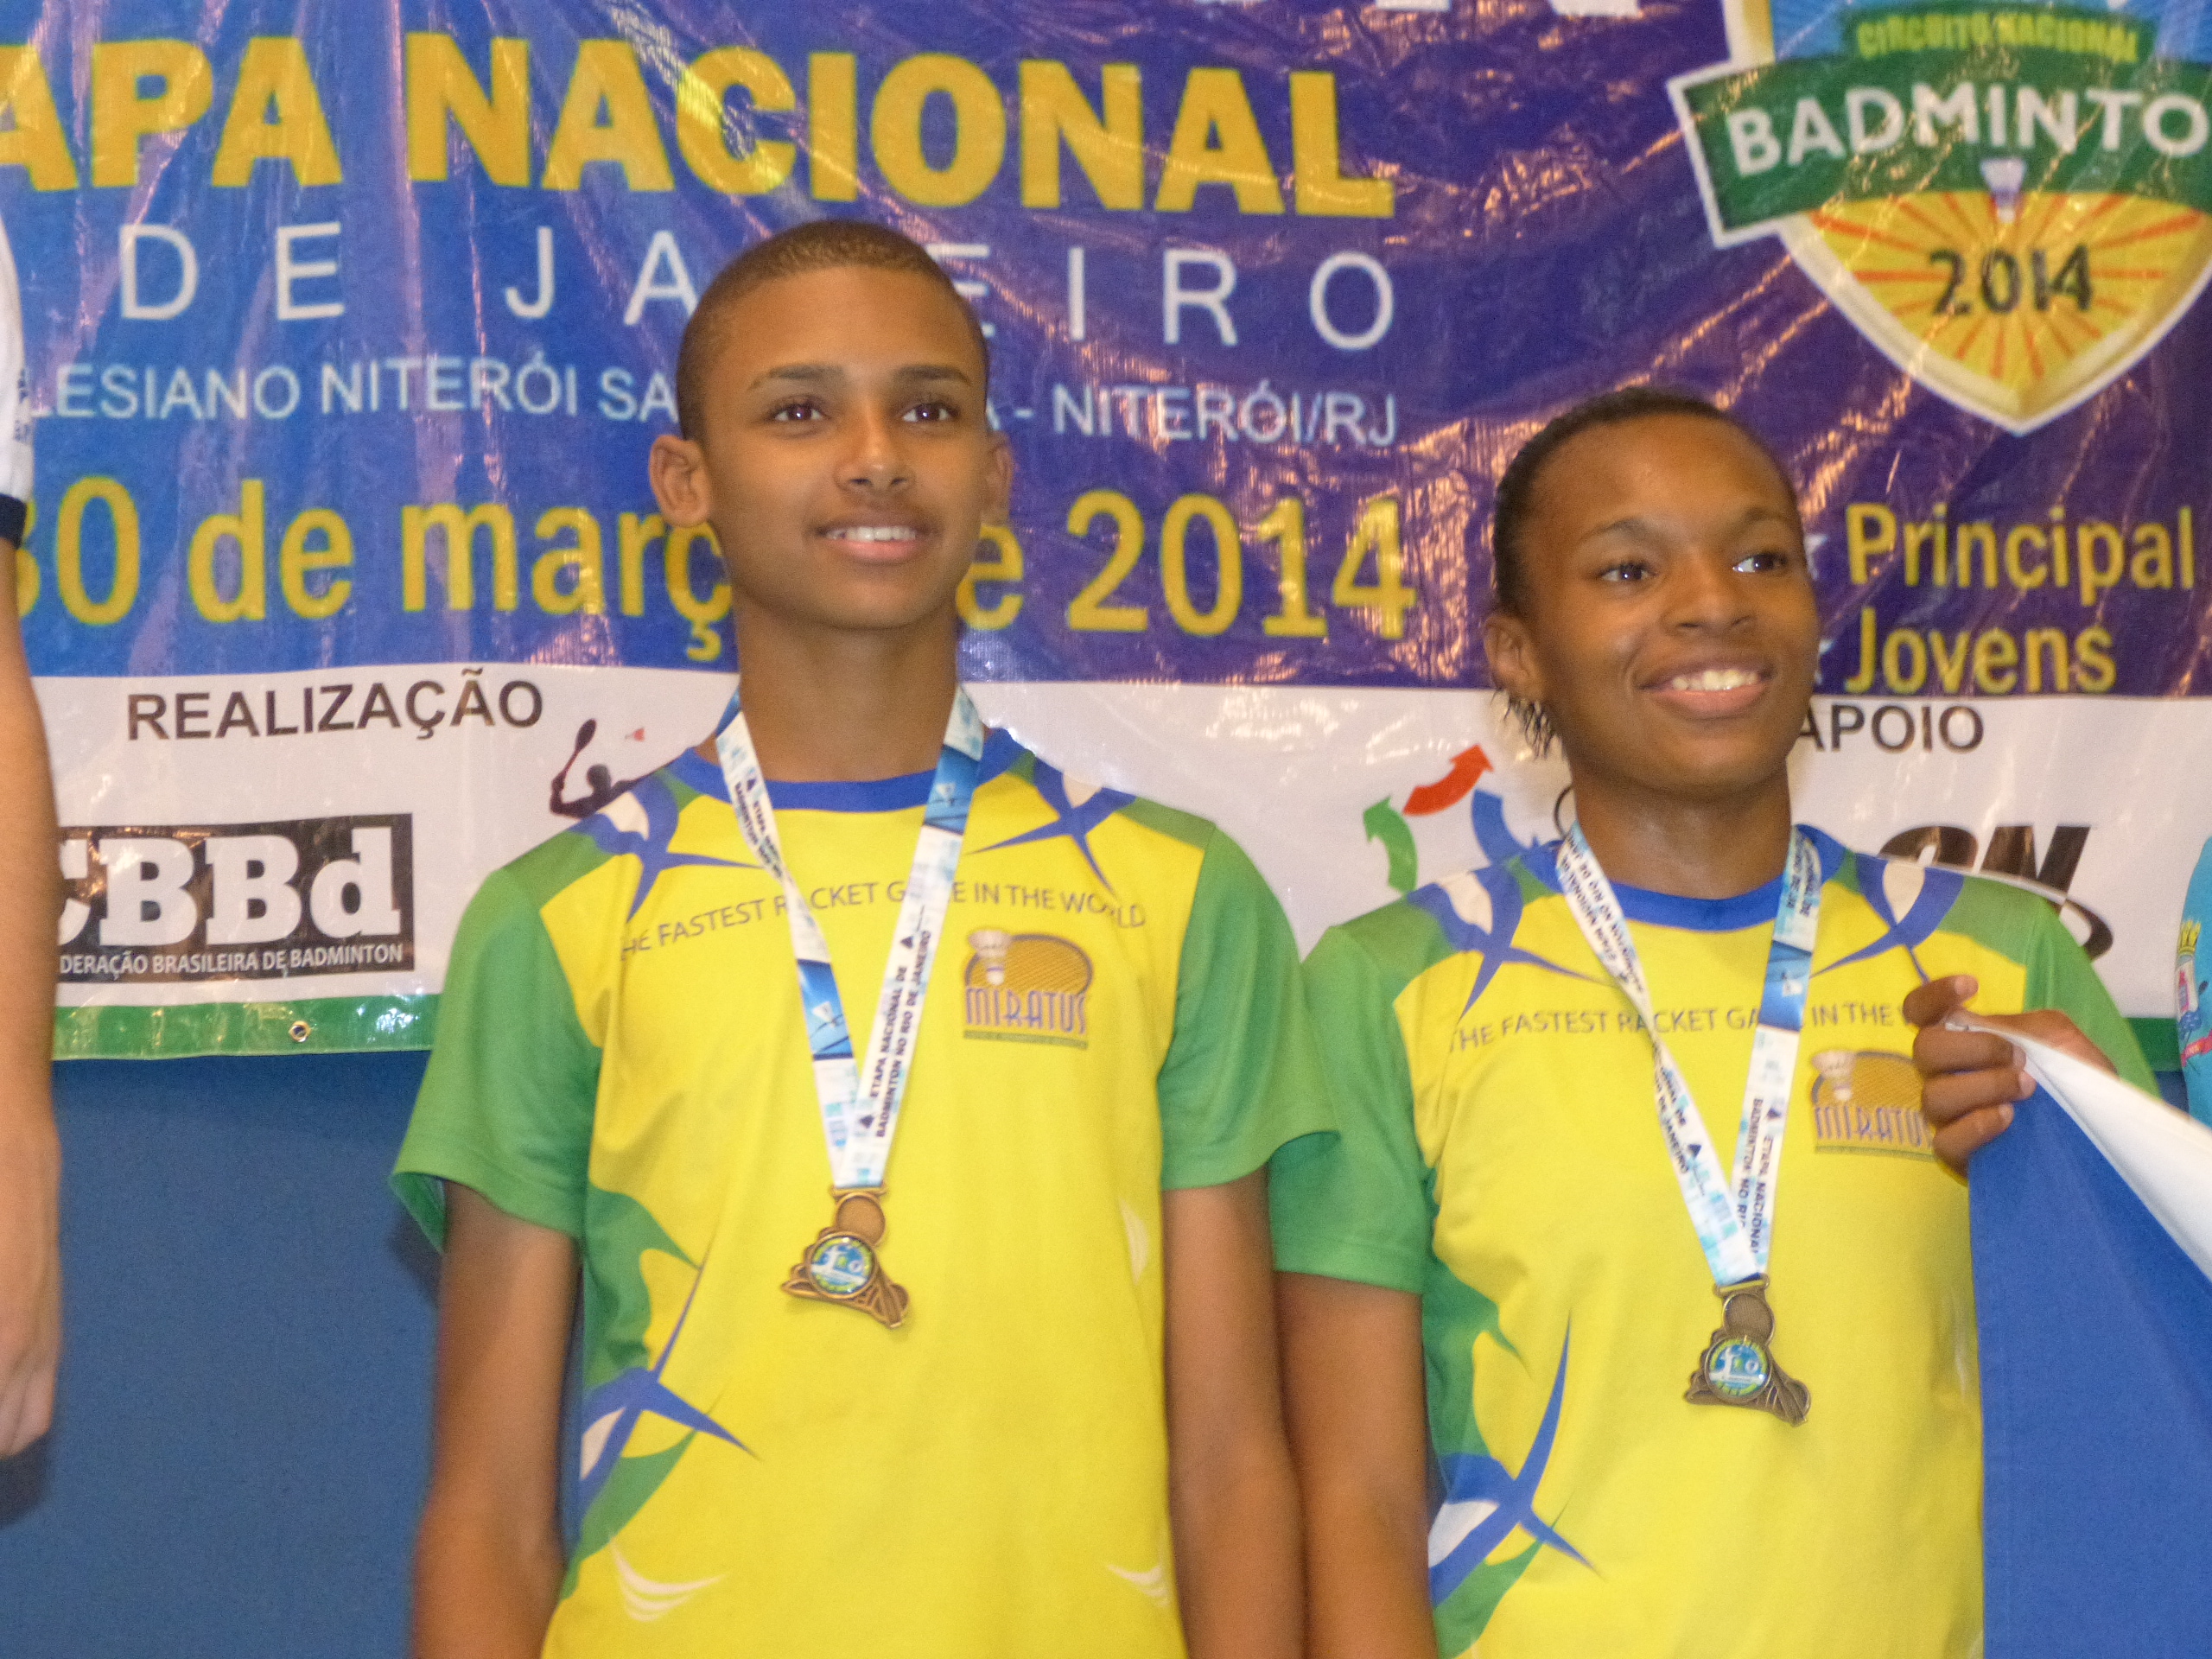 Niteroi National &#8211; March 2014